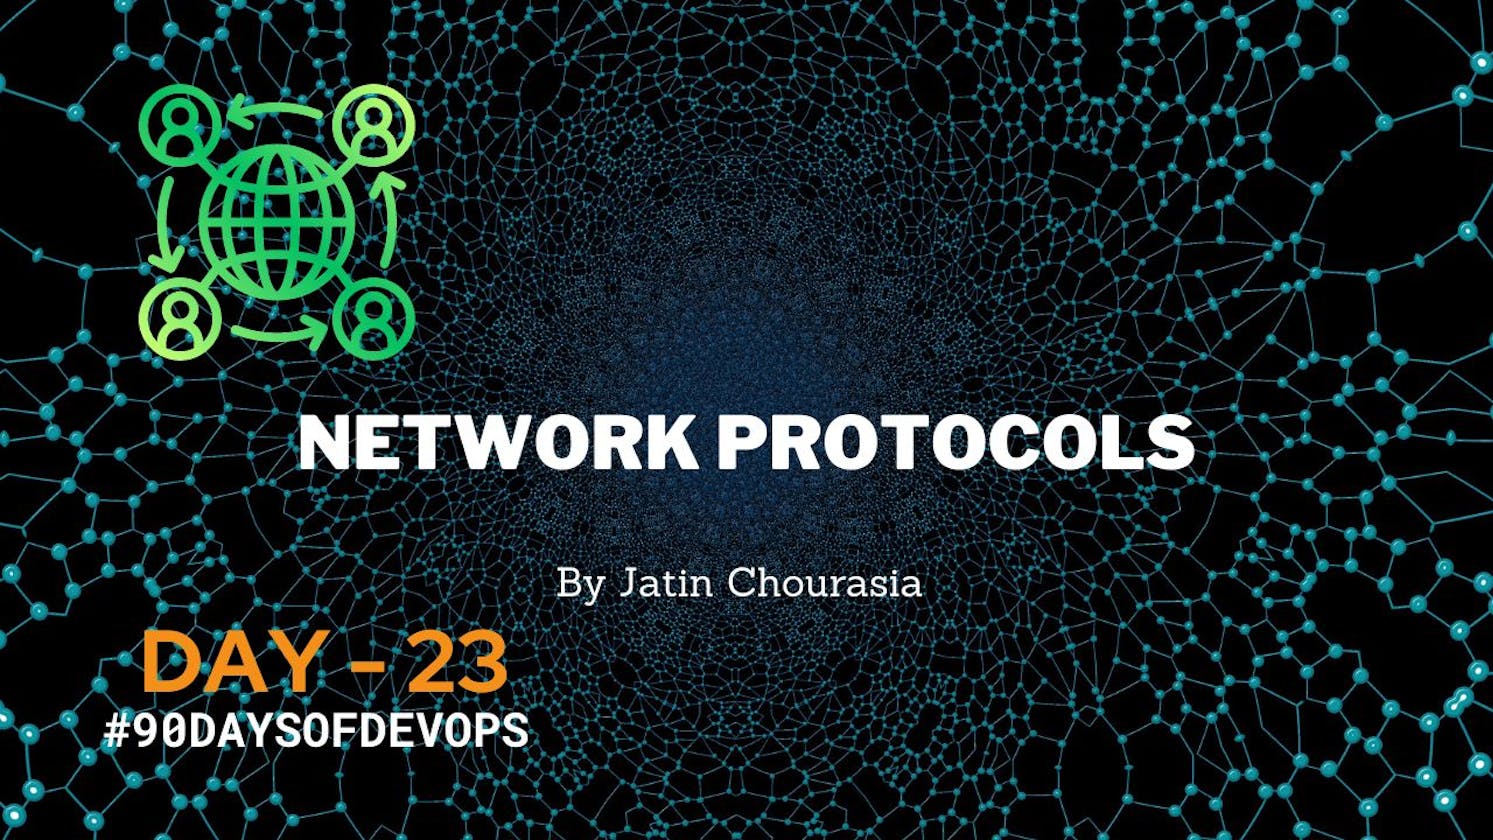 Understanding  network protocols in a simple way